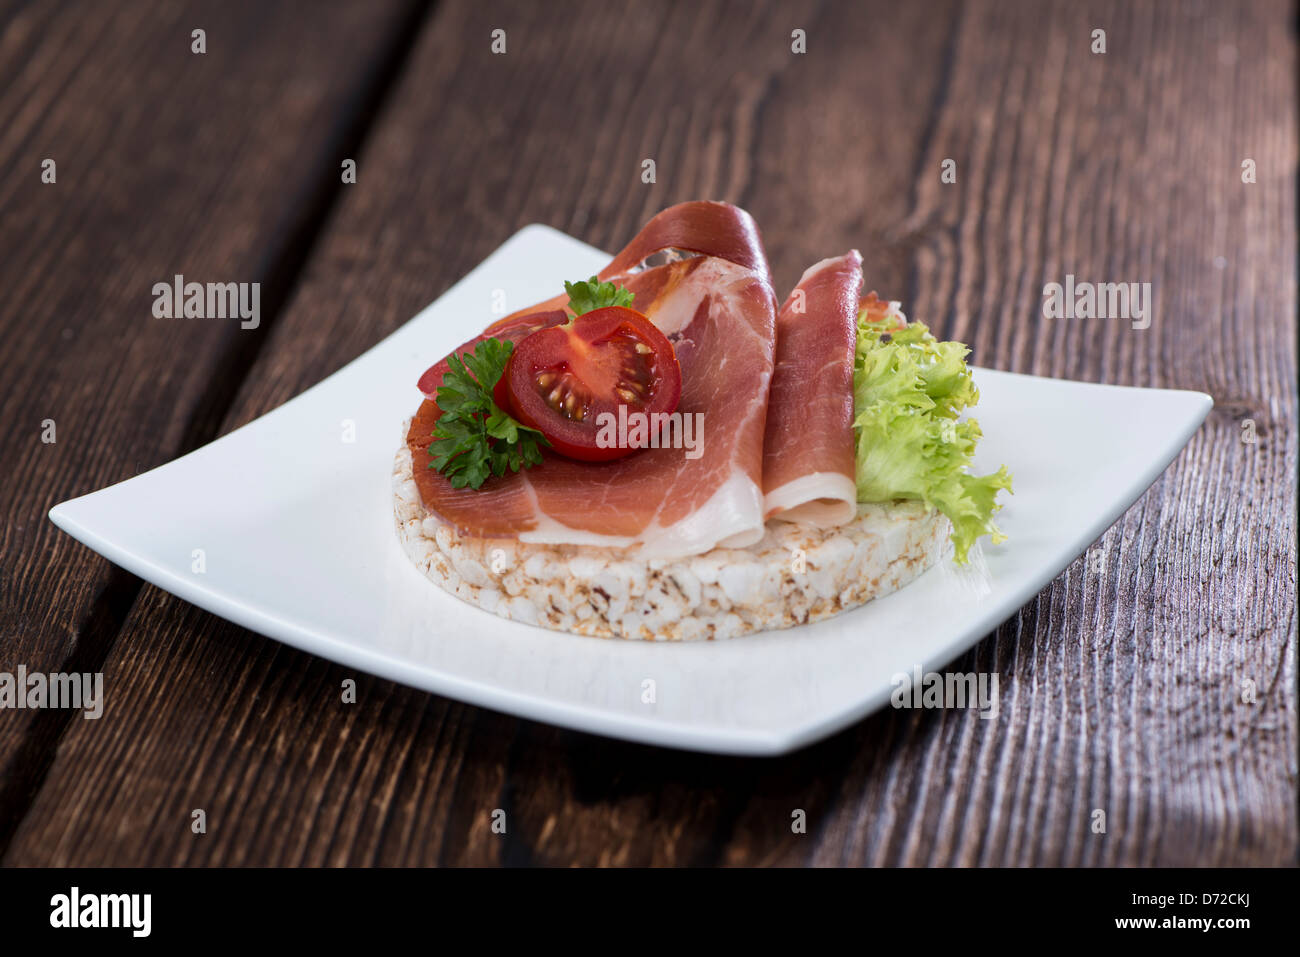 Diet food (rice cakes with healthy topping on a plate) Stock Photo